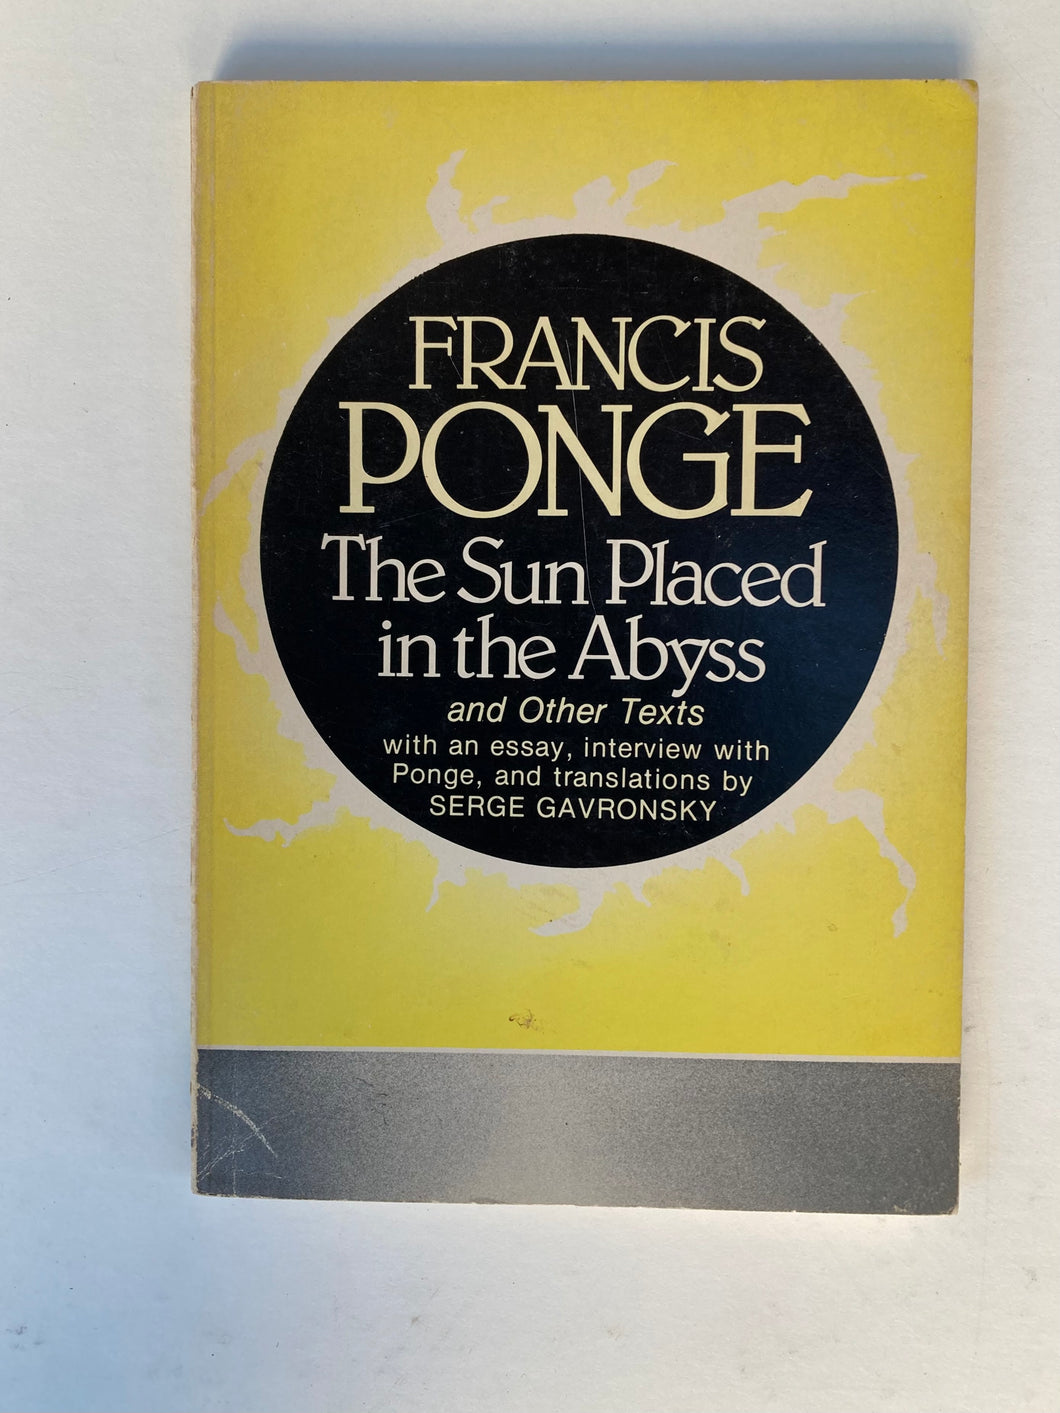 The Sun Placed in the Abyss by Francis Ponge